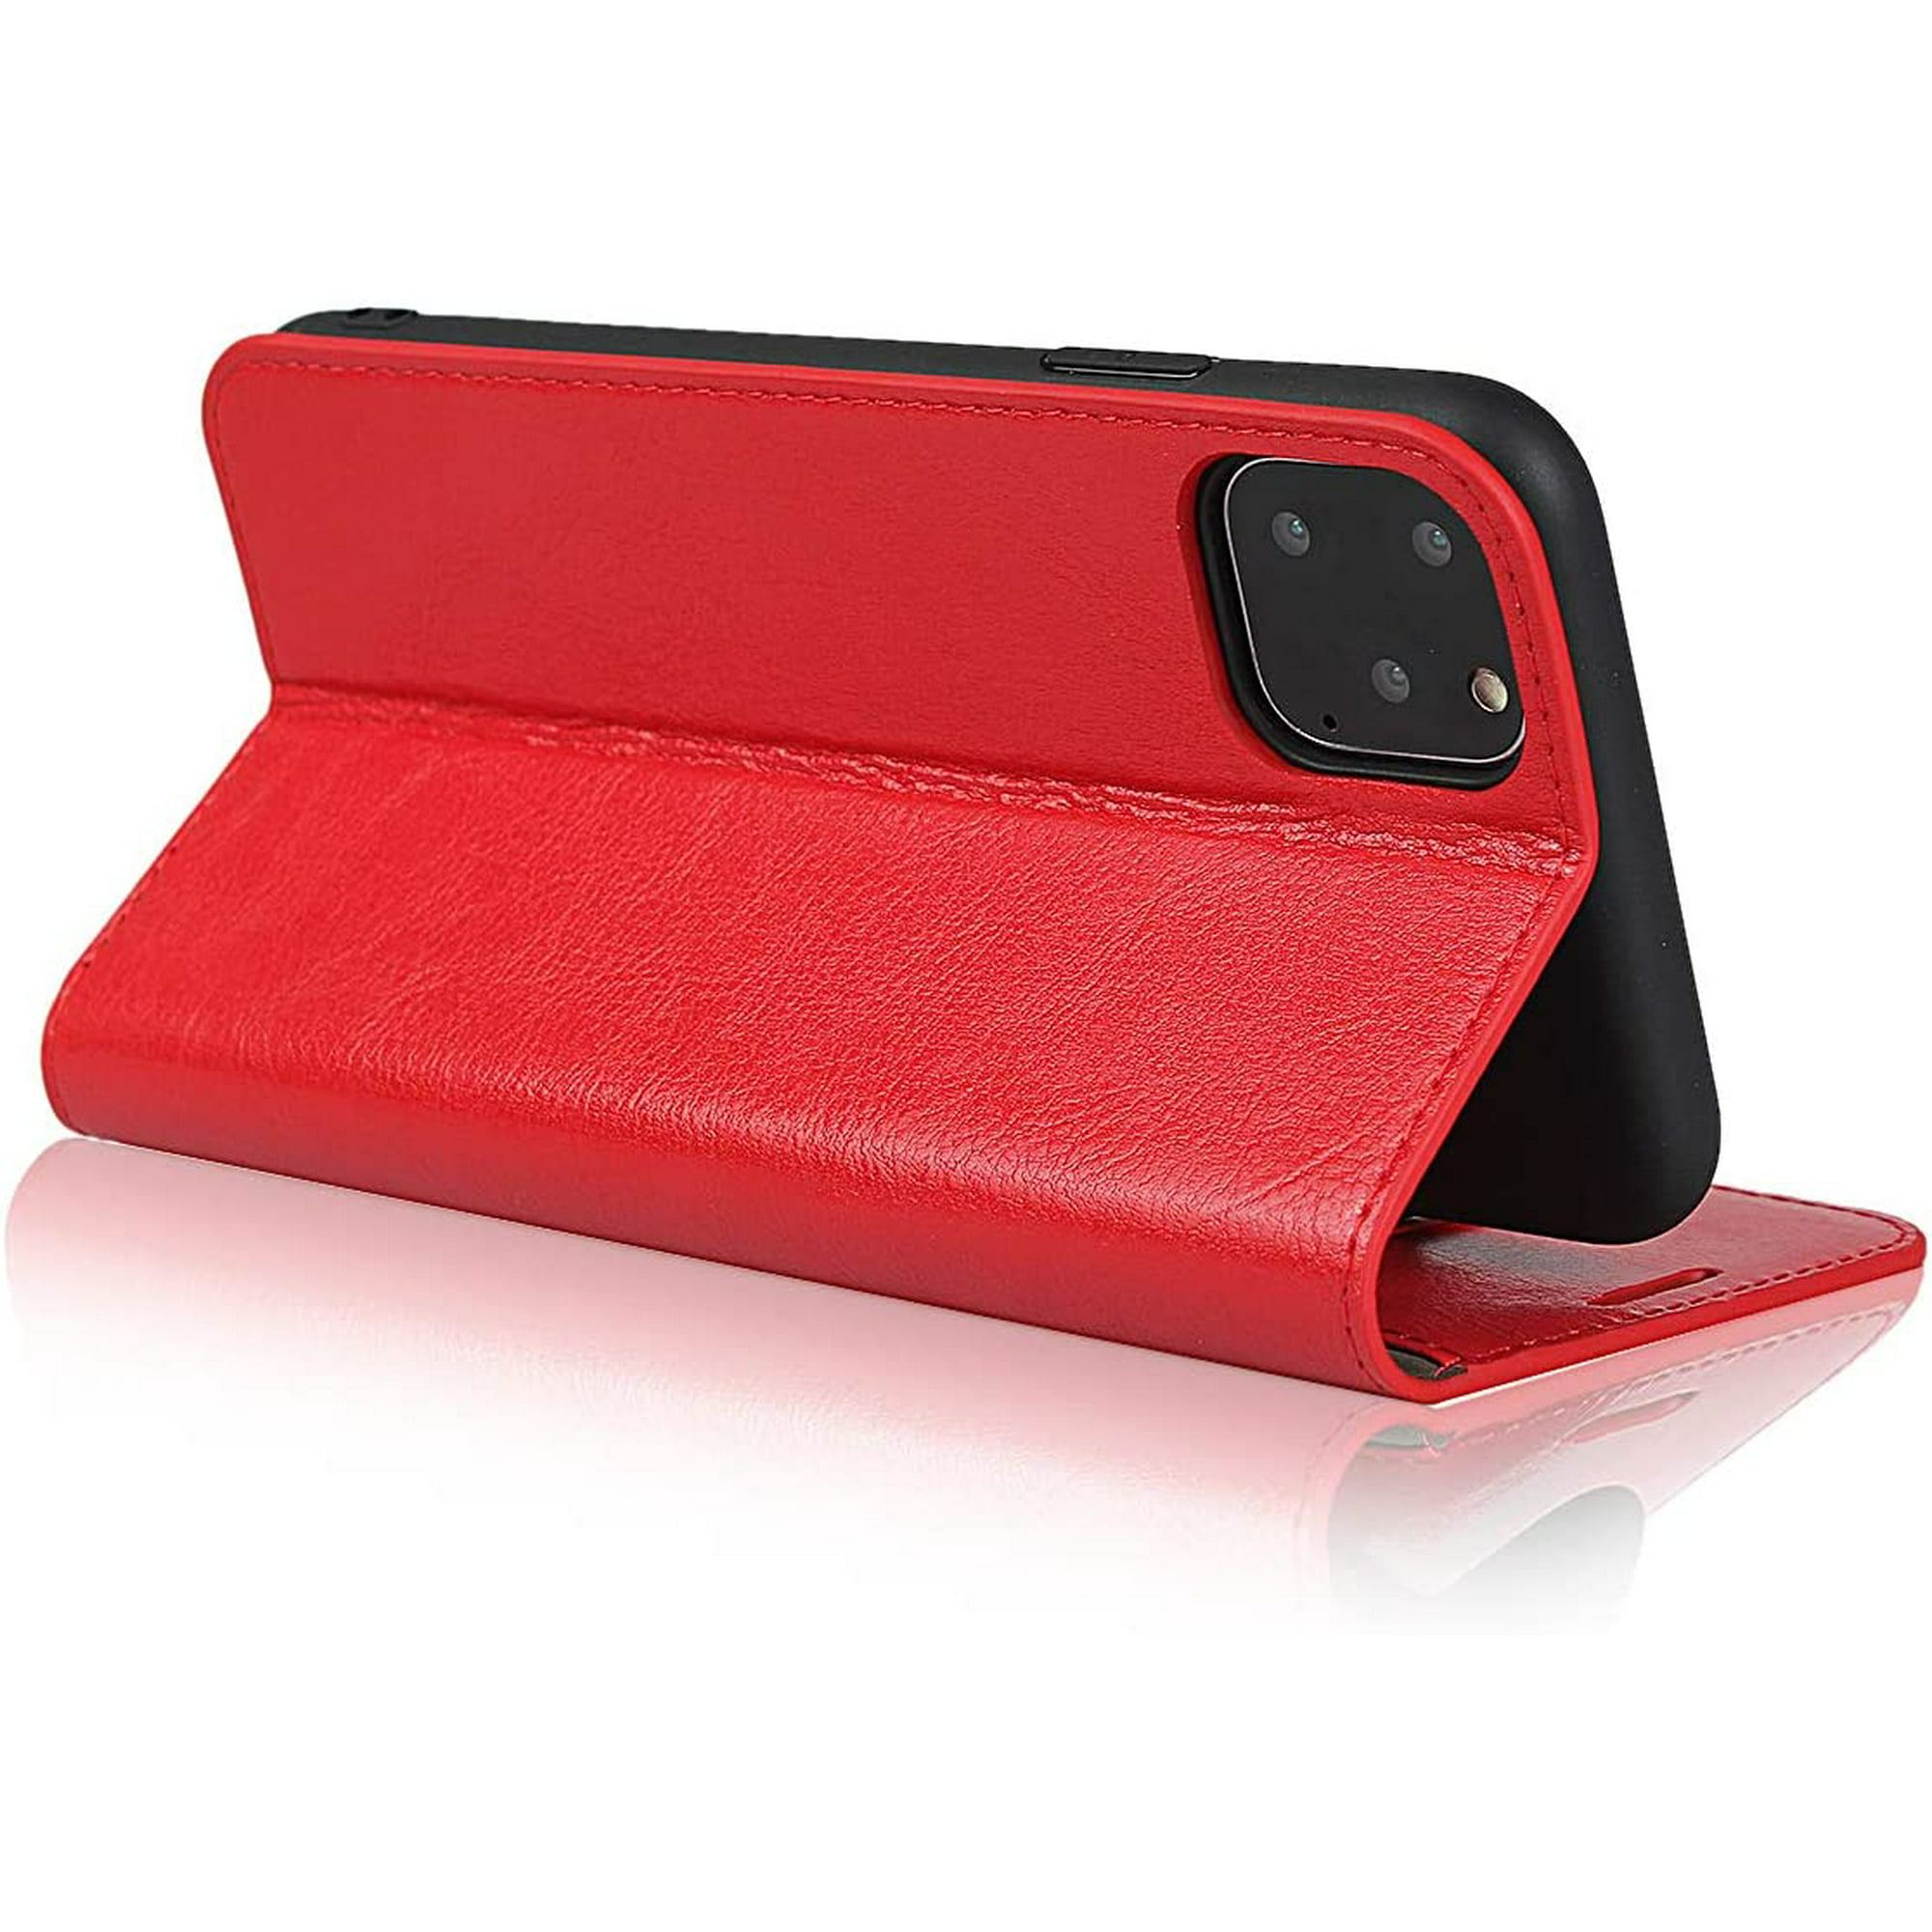 Cover for Leather Kickstand Extra-ShockProof Business Card Holders cell phone case Flip Cover iPhone 11 Pro Max Flip Case 